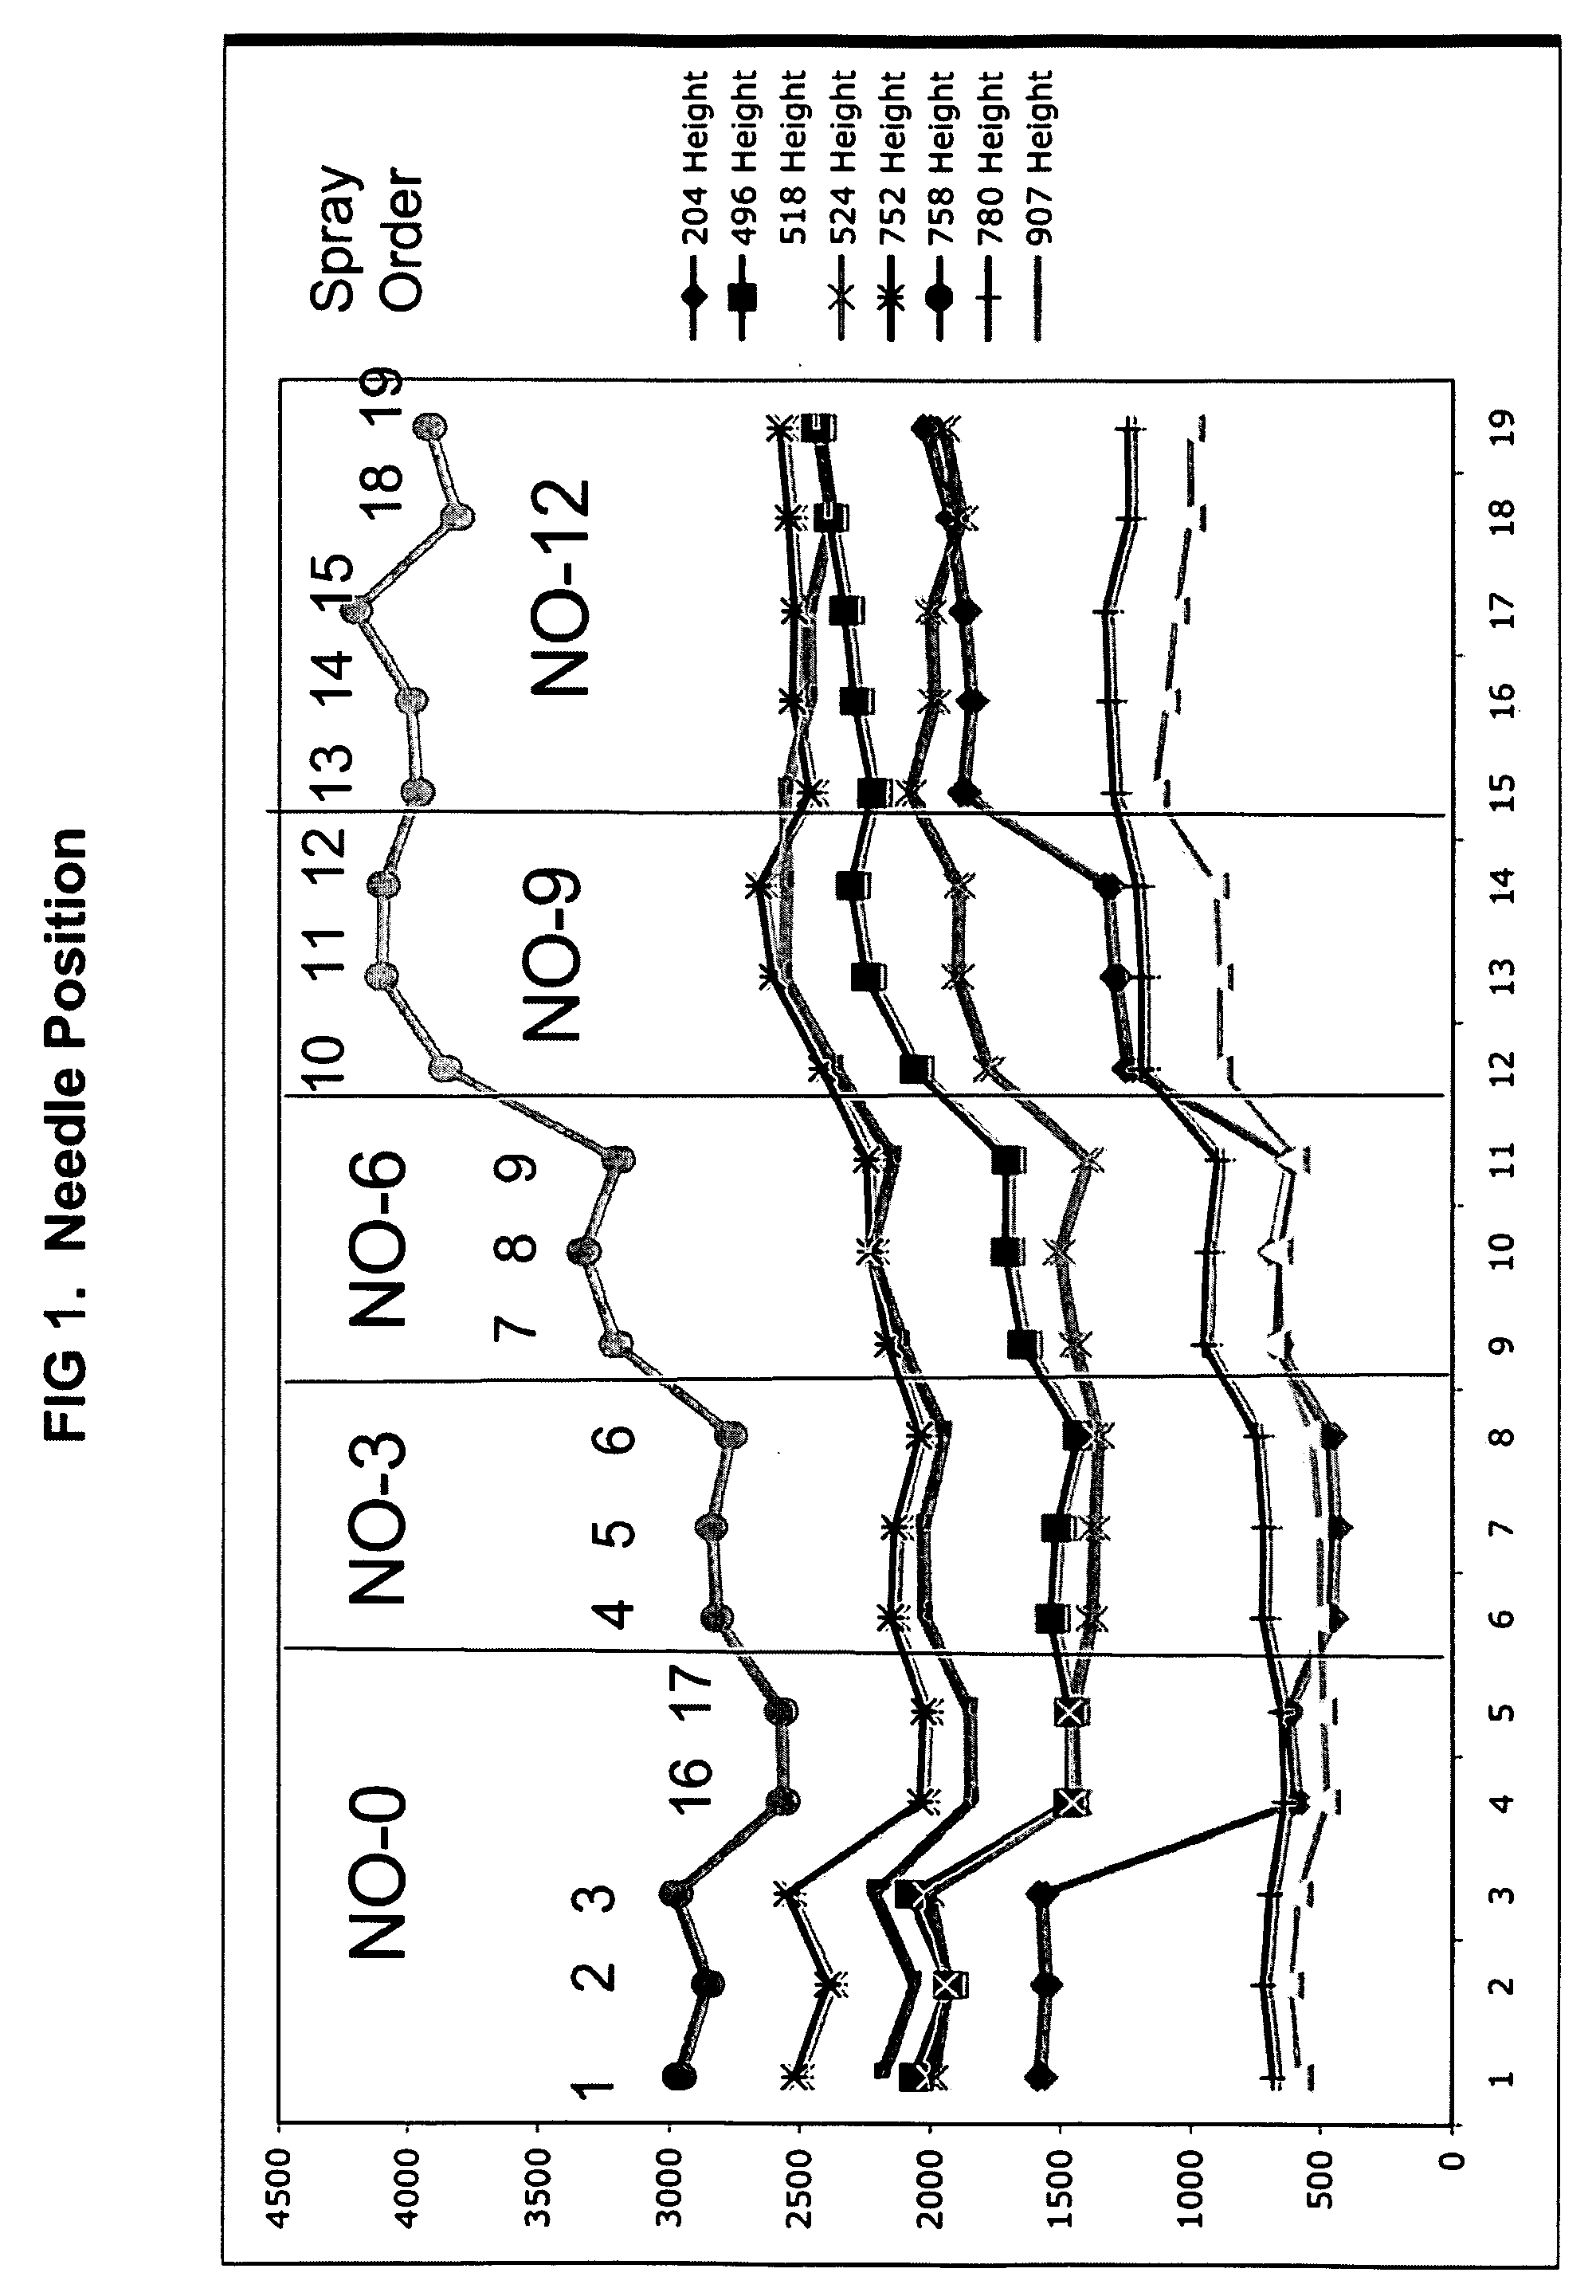 Method for Calibrating an Analytical Instrument